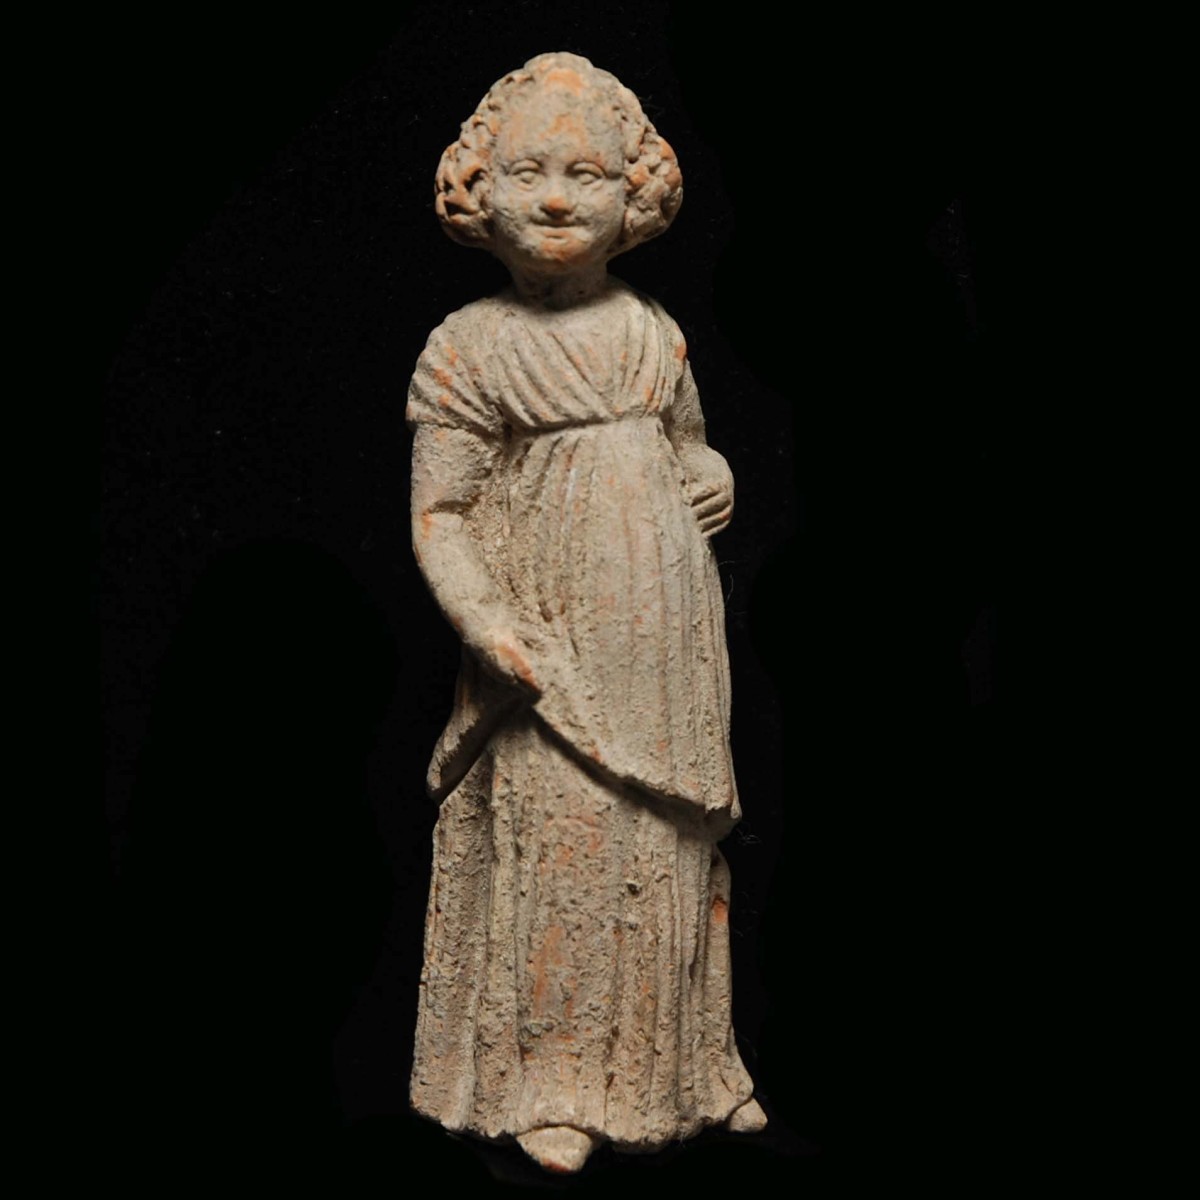 Tanagra statuette of a young girl